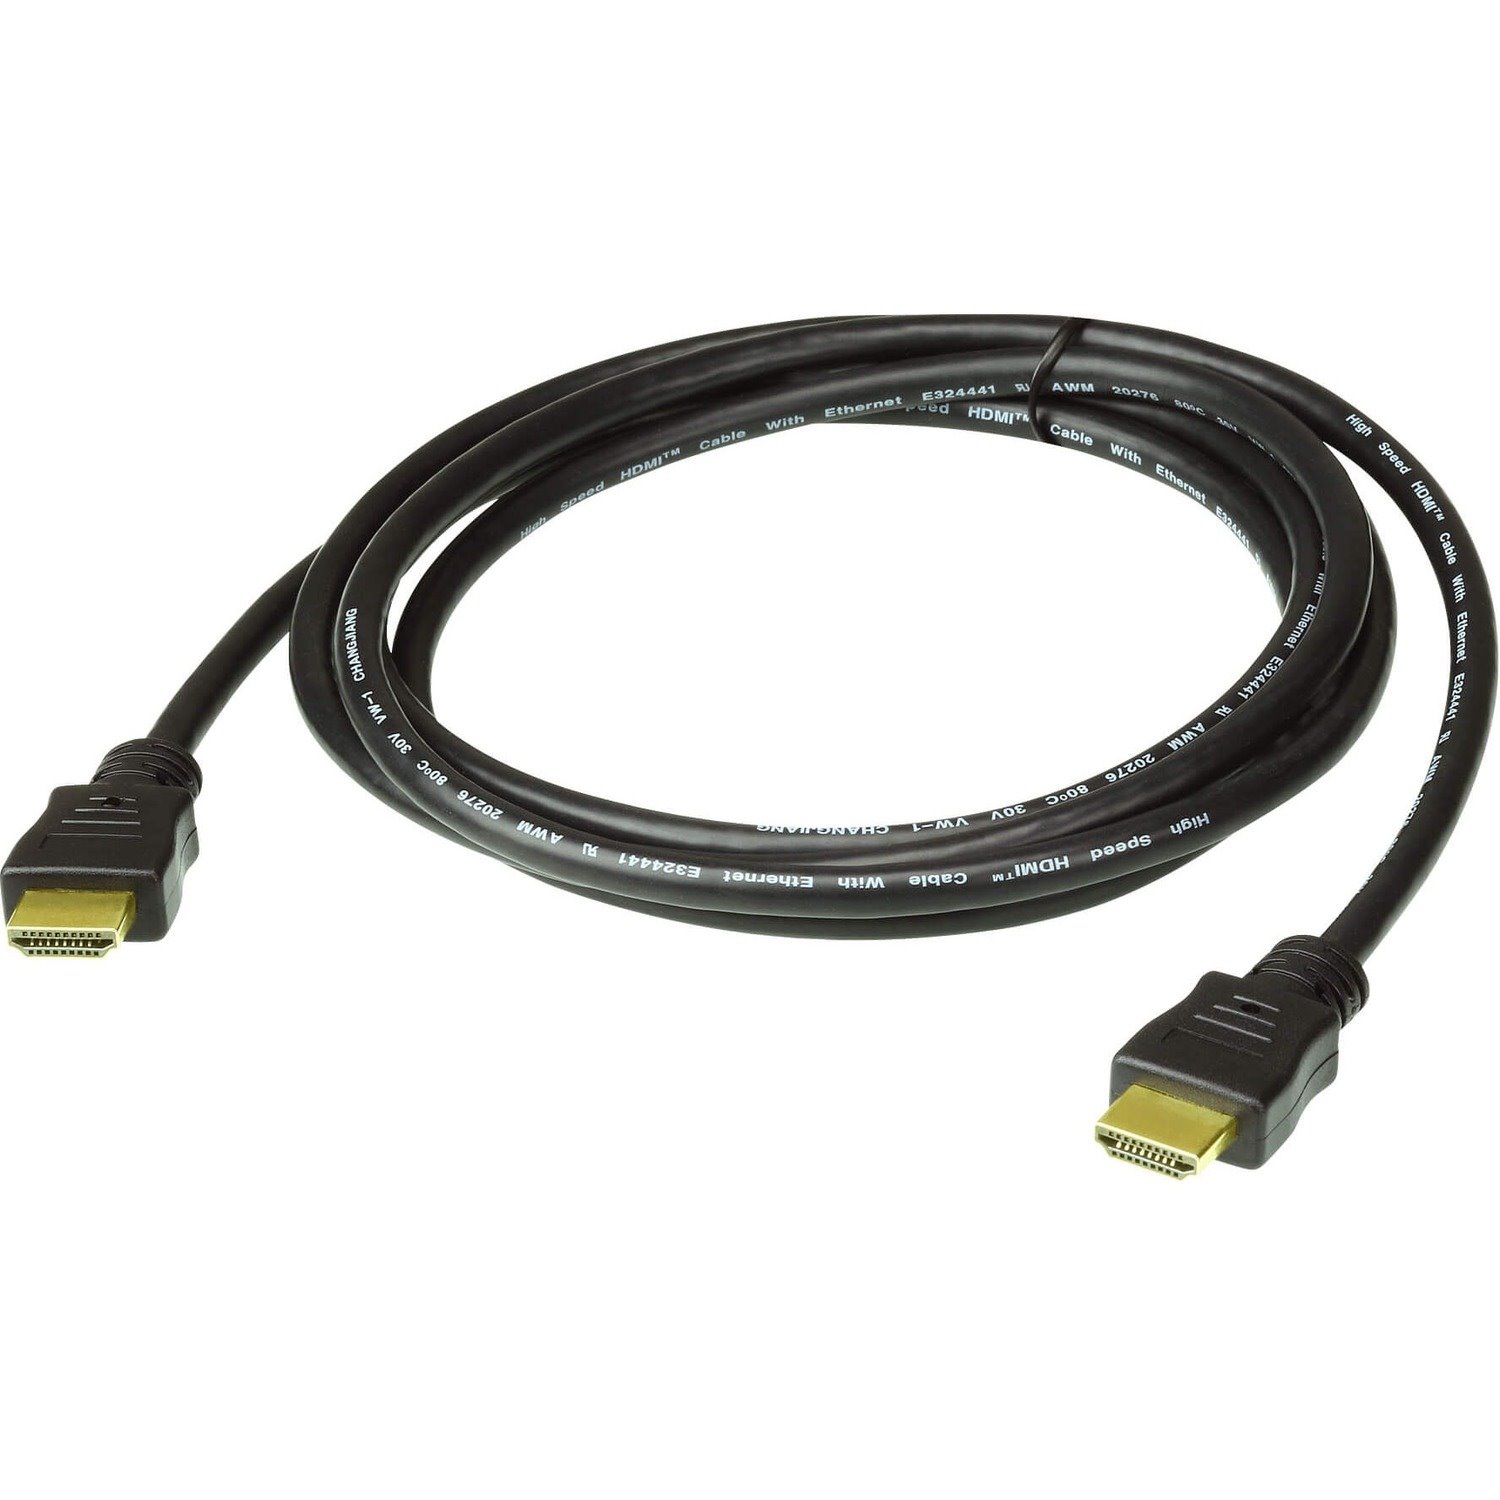 ATEN 2L-7D02H-1 2 m HDMI A/V Cable for Audio/Video Device, Video Splitter, Video Extender, KVM Switch, KVM Extender, Audio/Video Switchbox, Signal Converter - 1